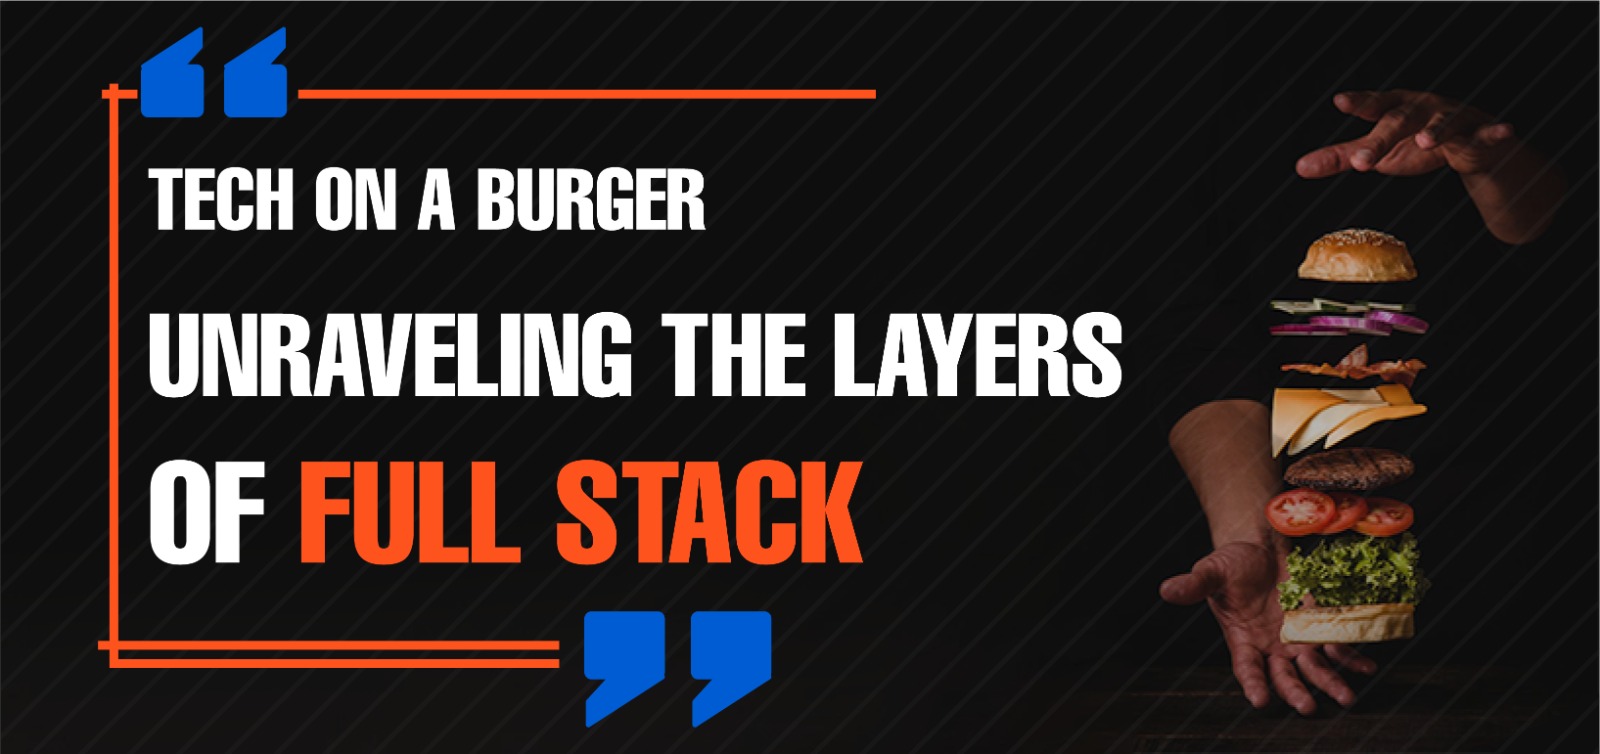 Tech on a Burger: Unraveling the Layers of Full Stack